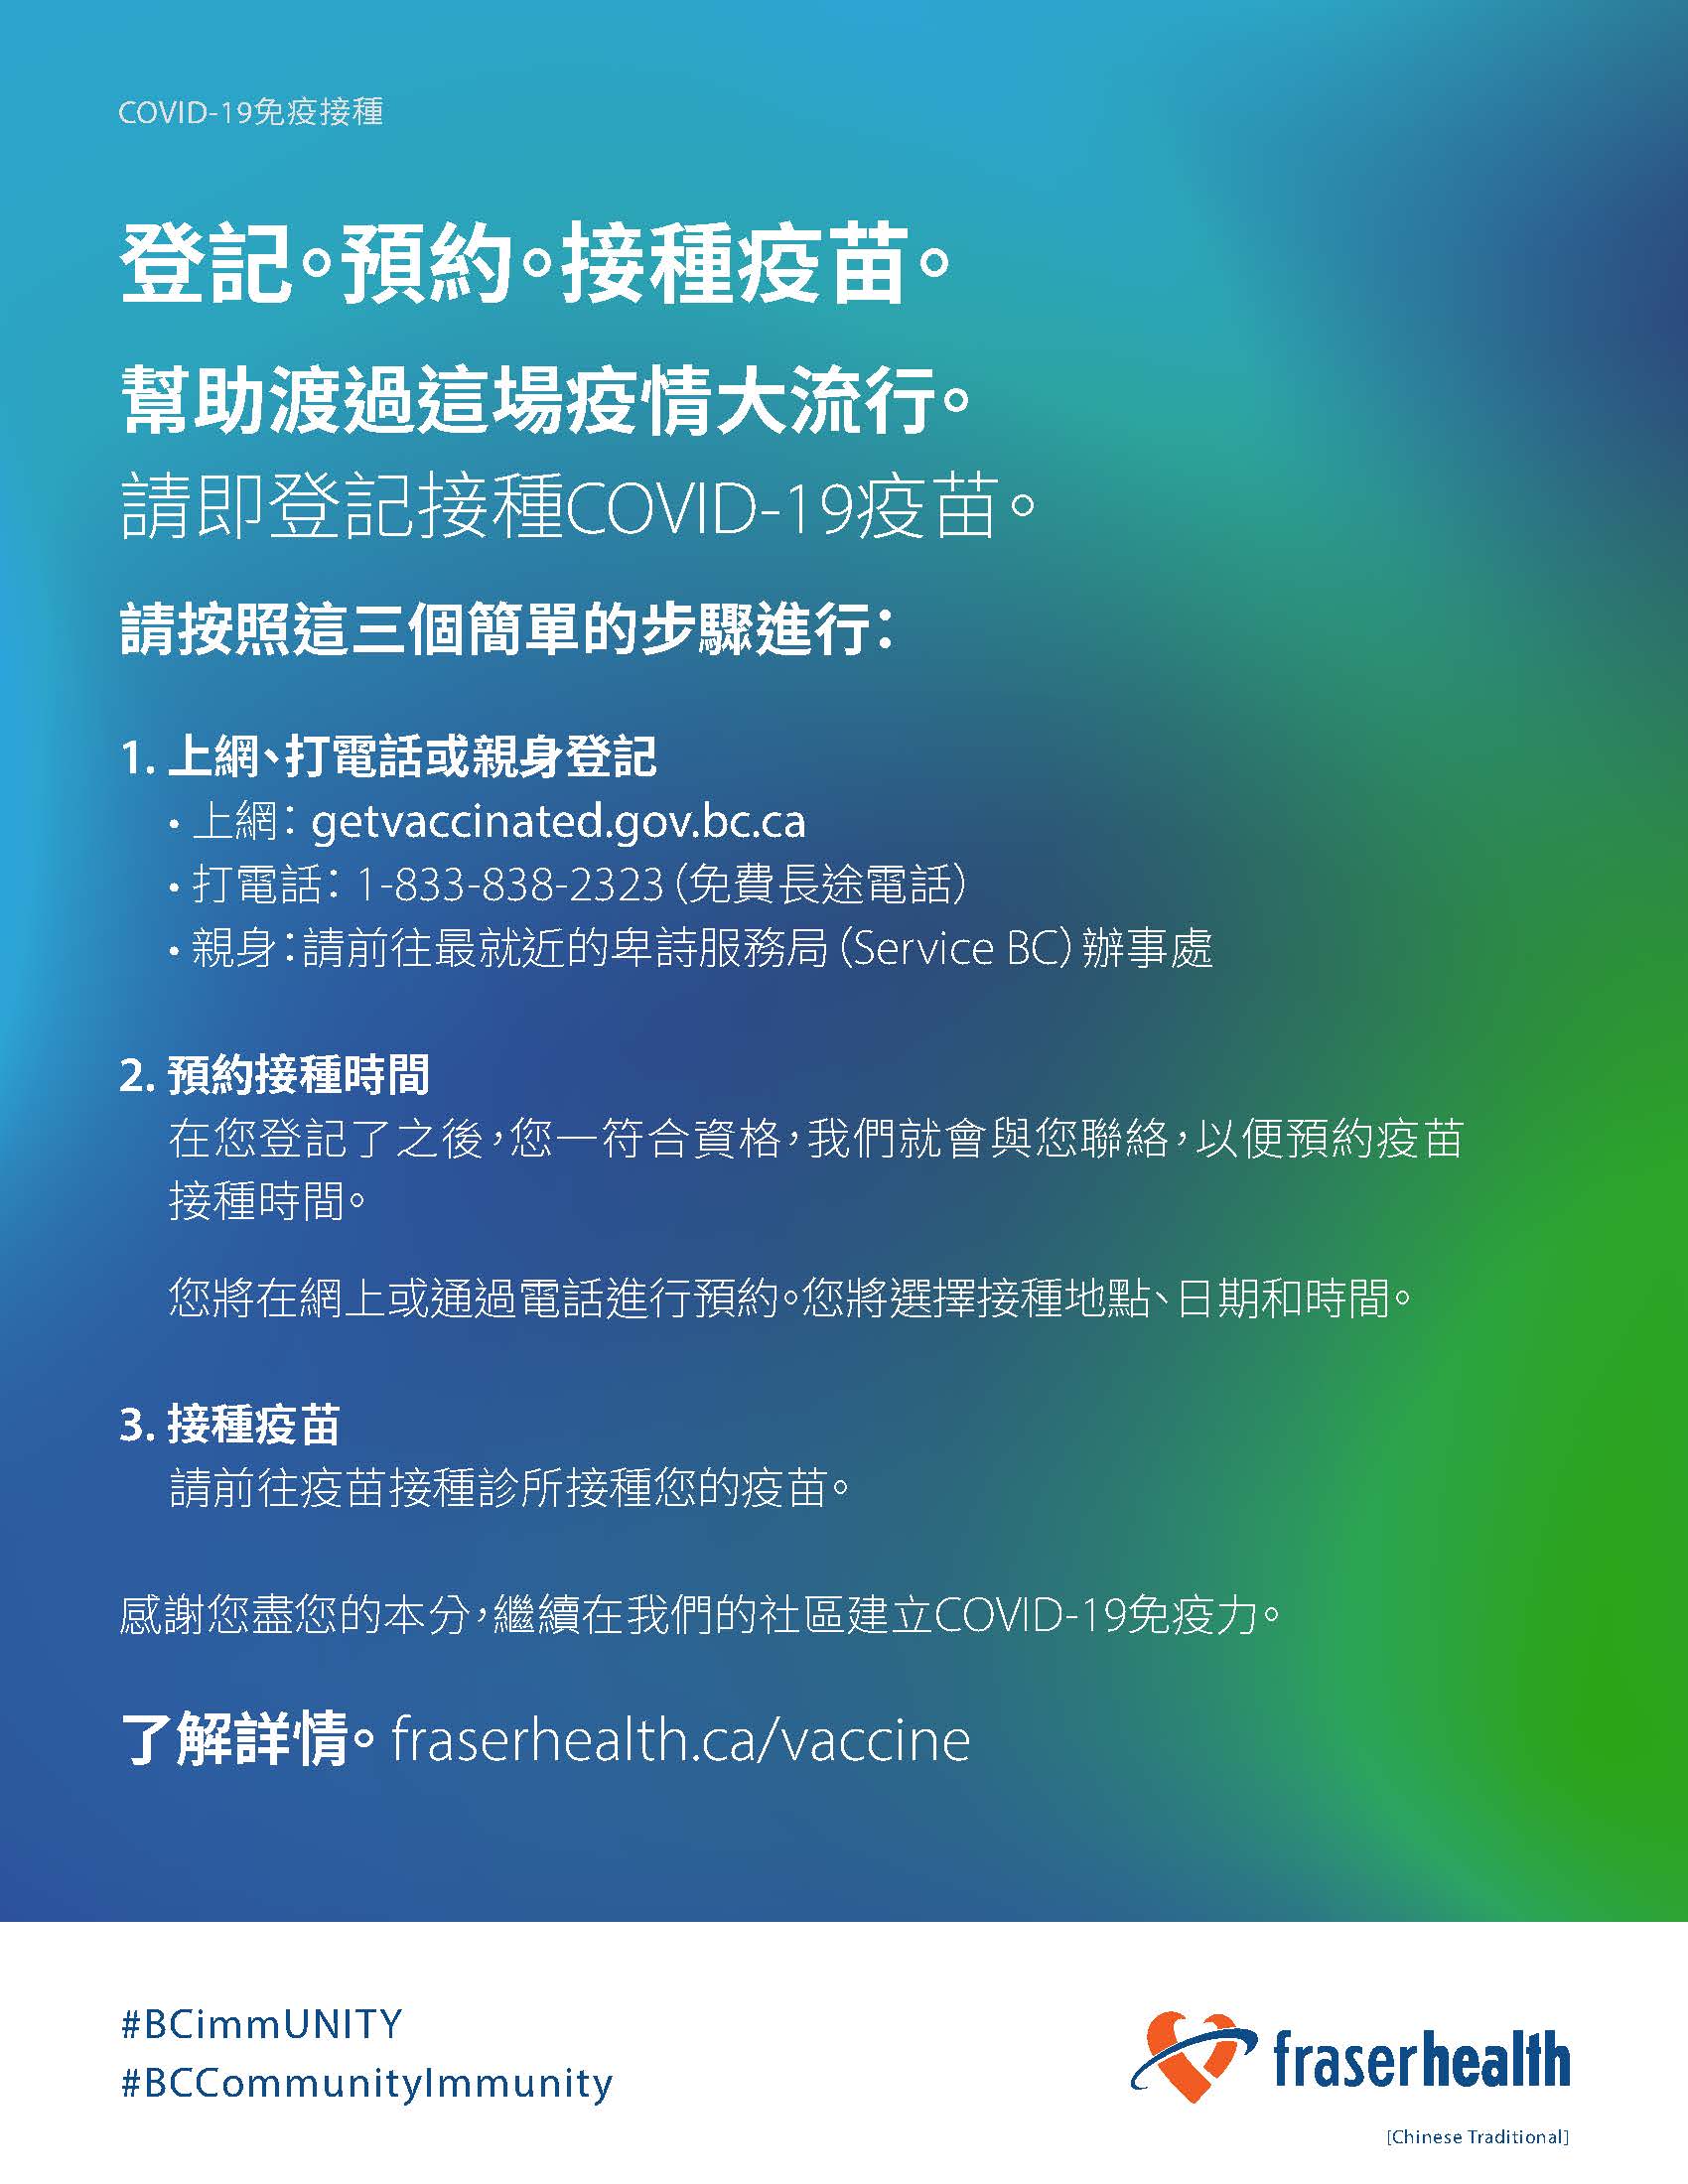 Vaccine registration for Chinese Tradtional in colour